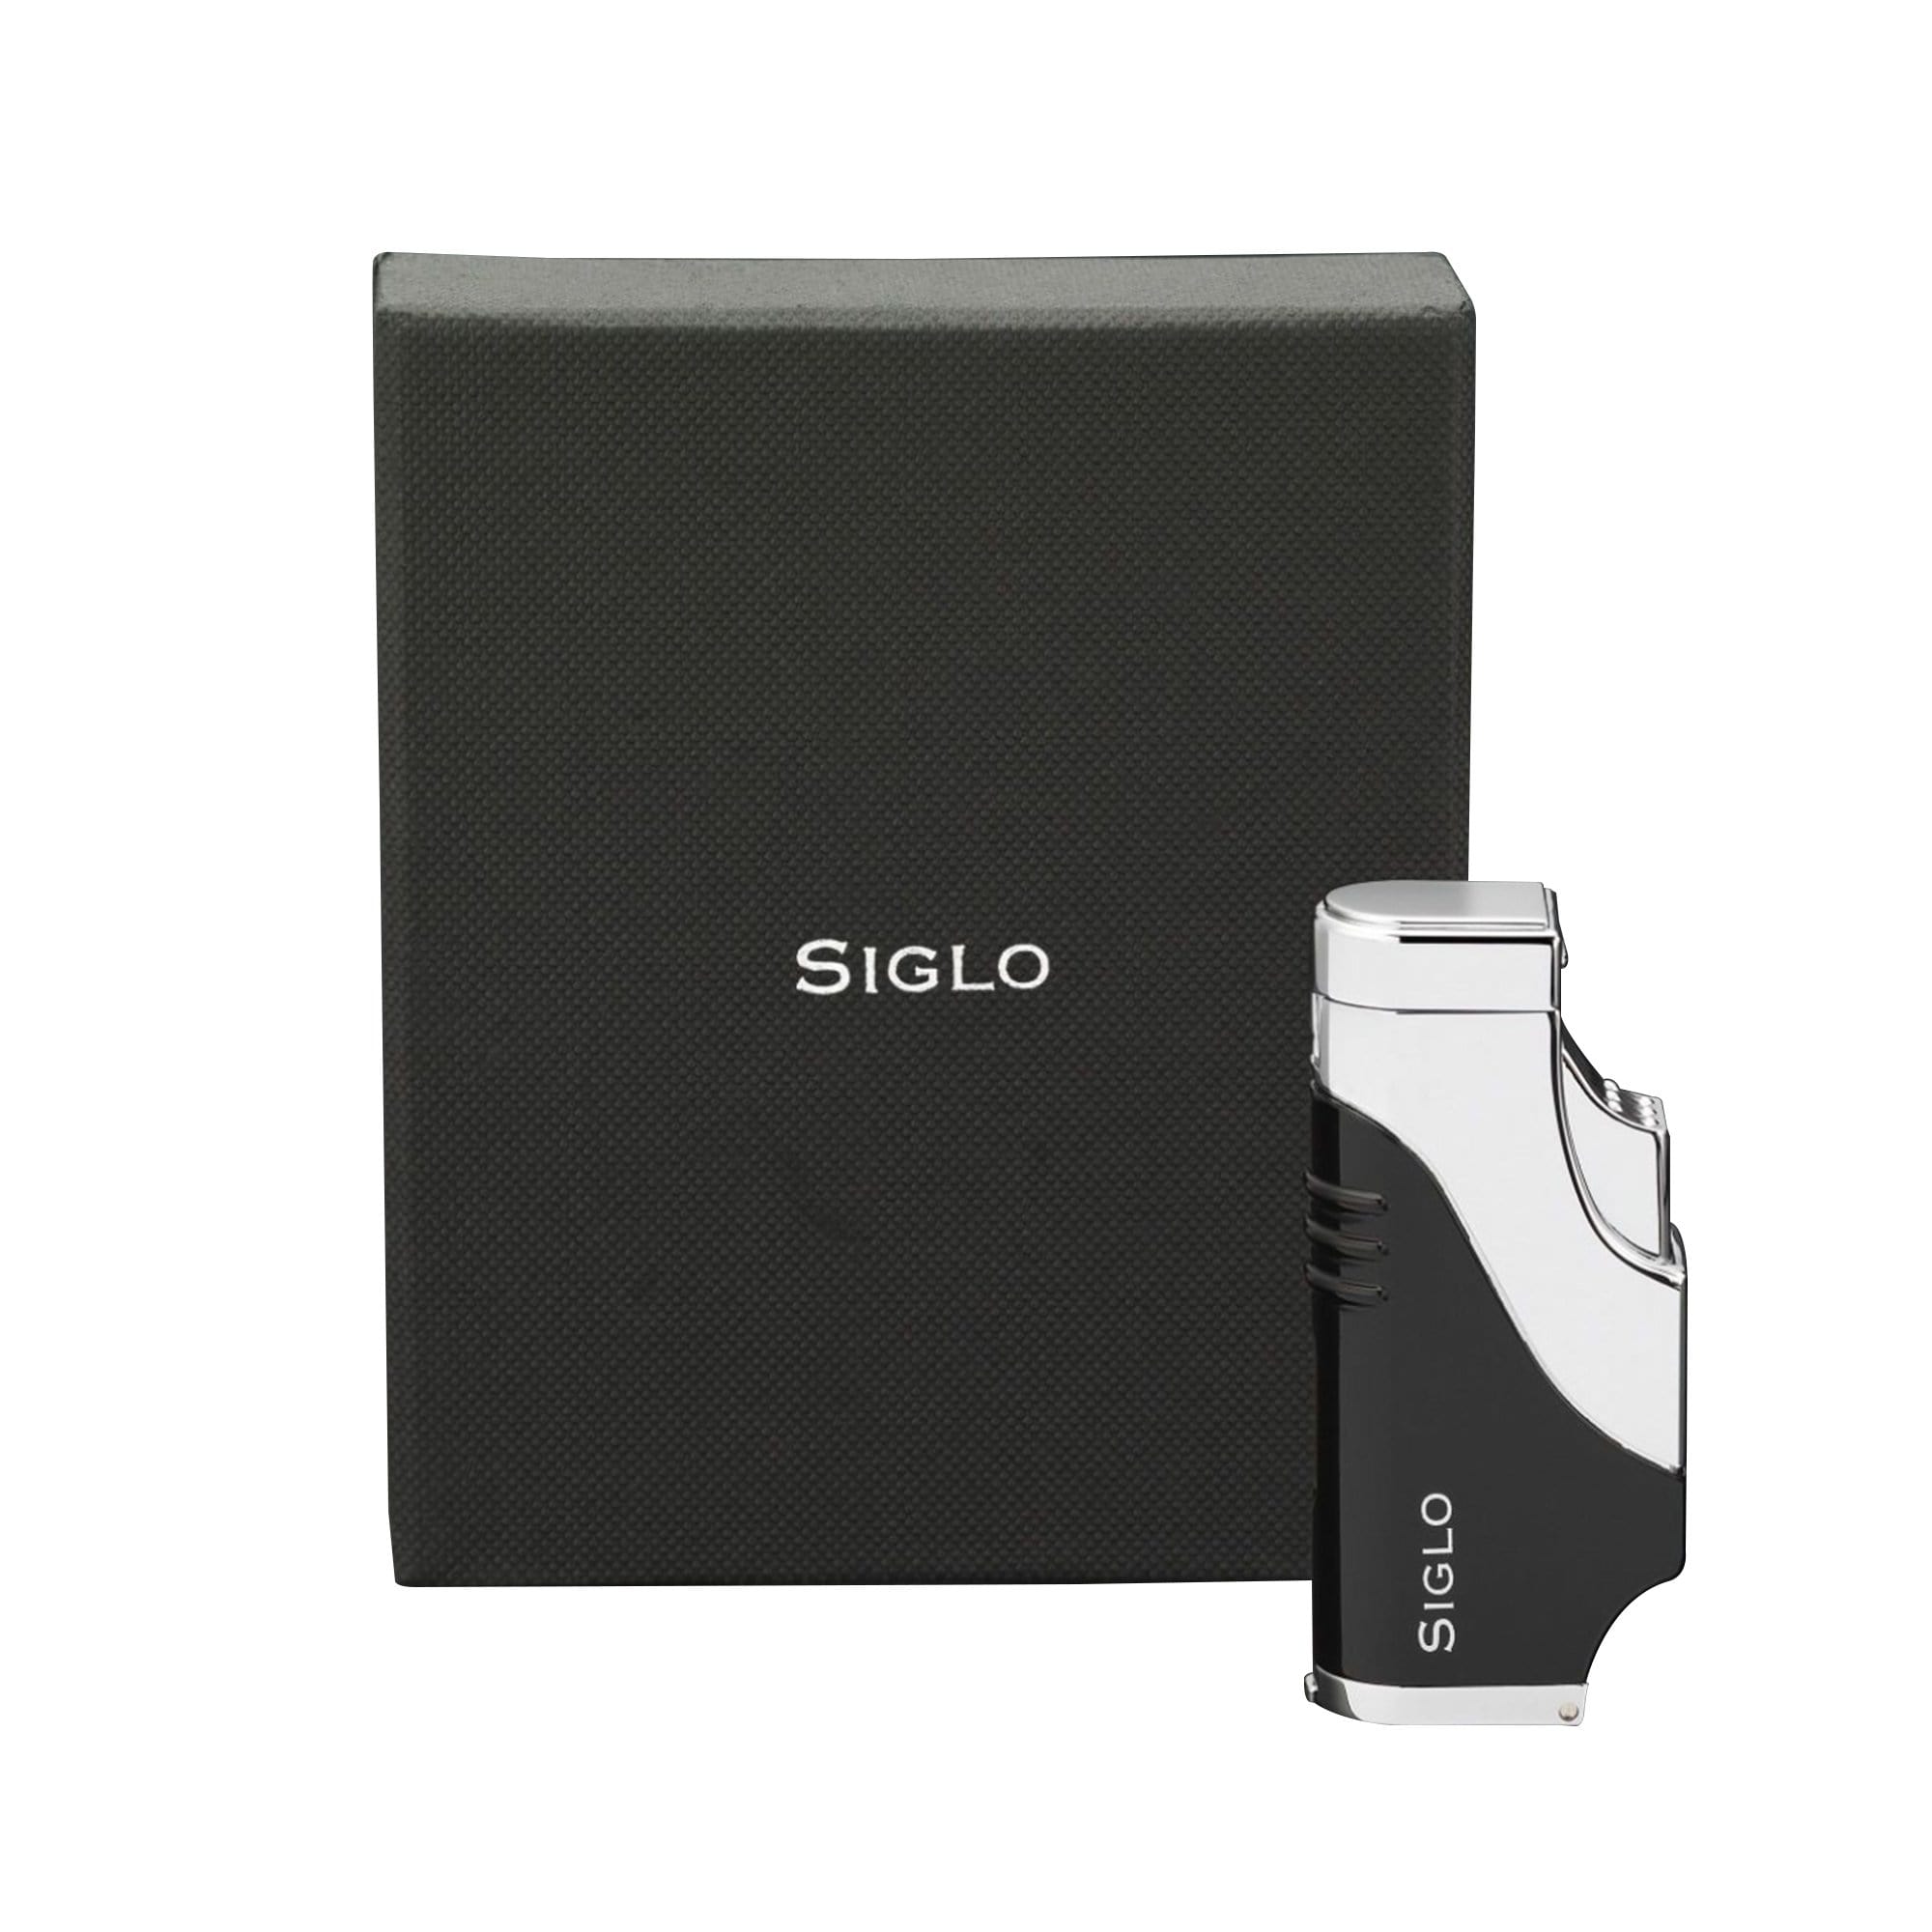 SIGLO ACCESSORIES Blue SIGLO TRIPLE FLAME LIGHTER